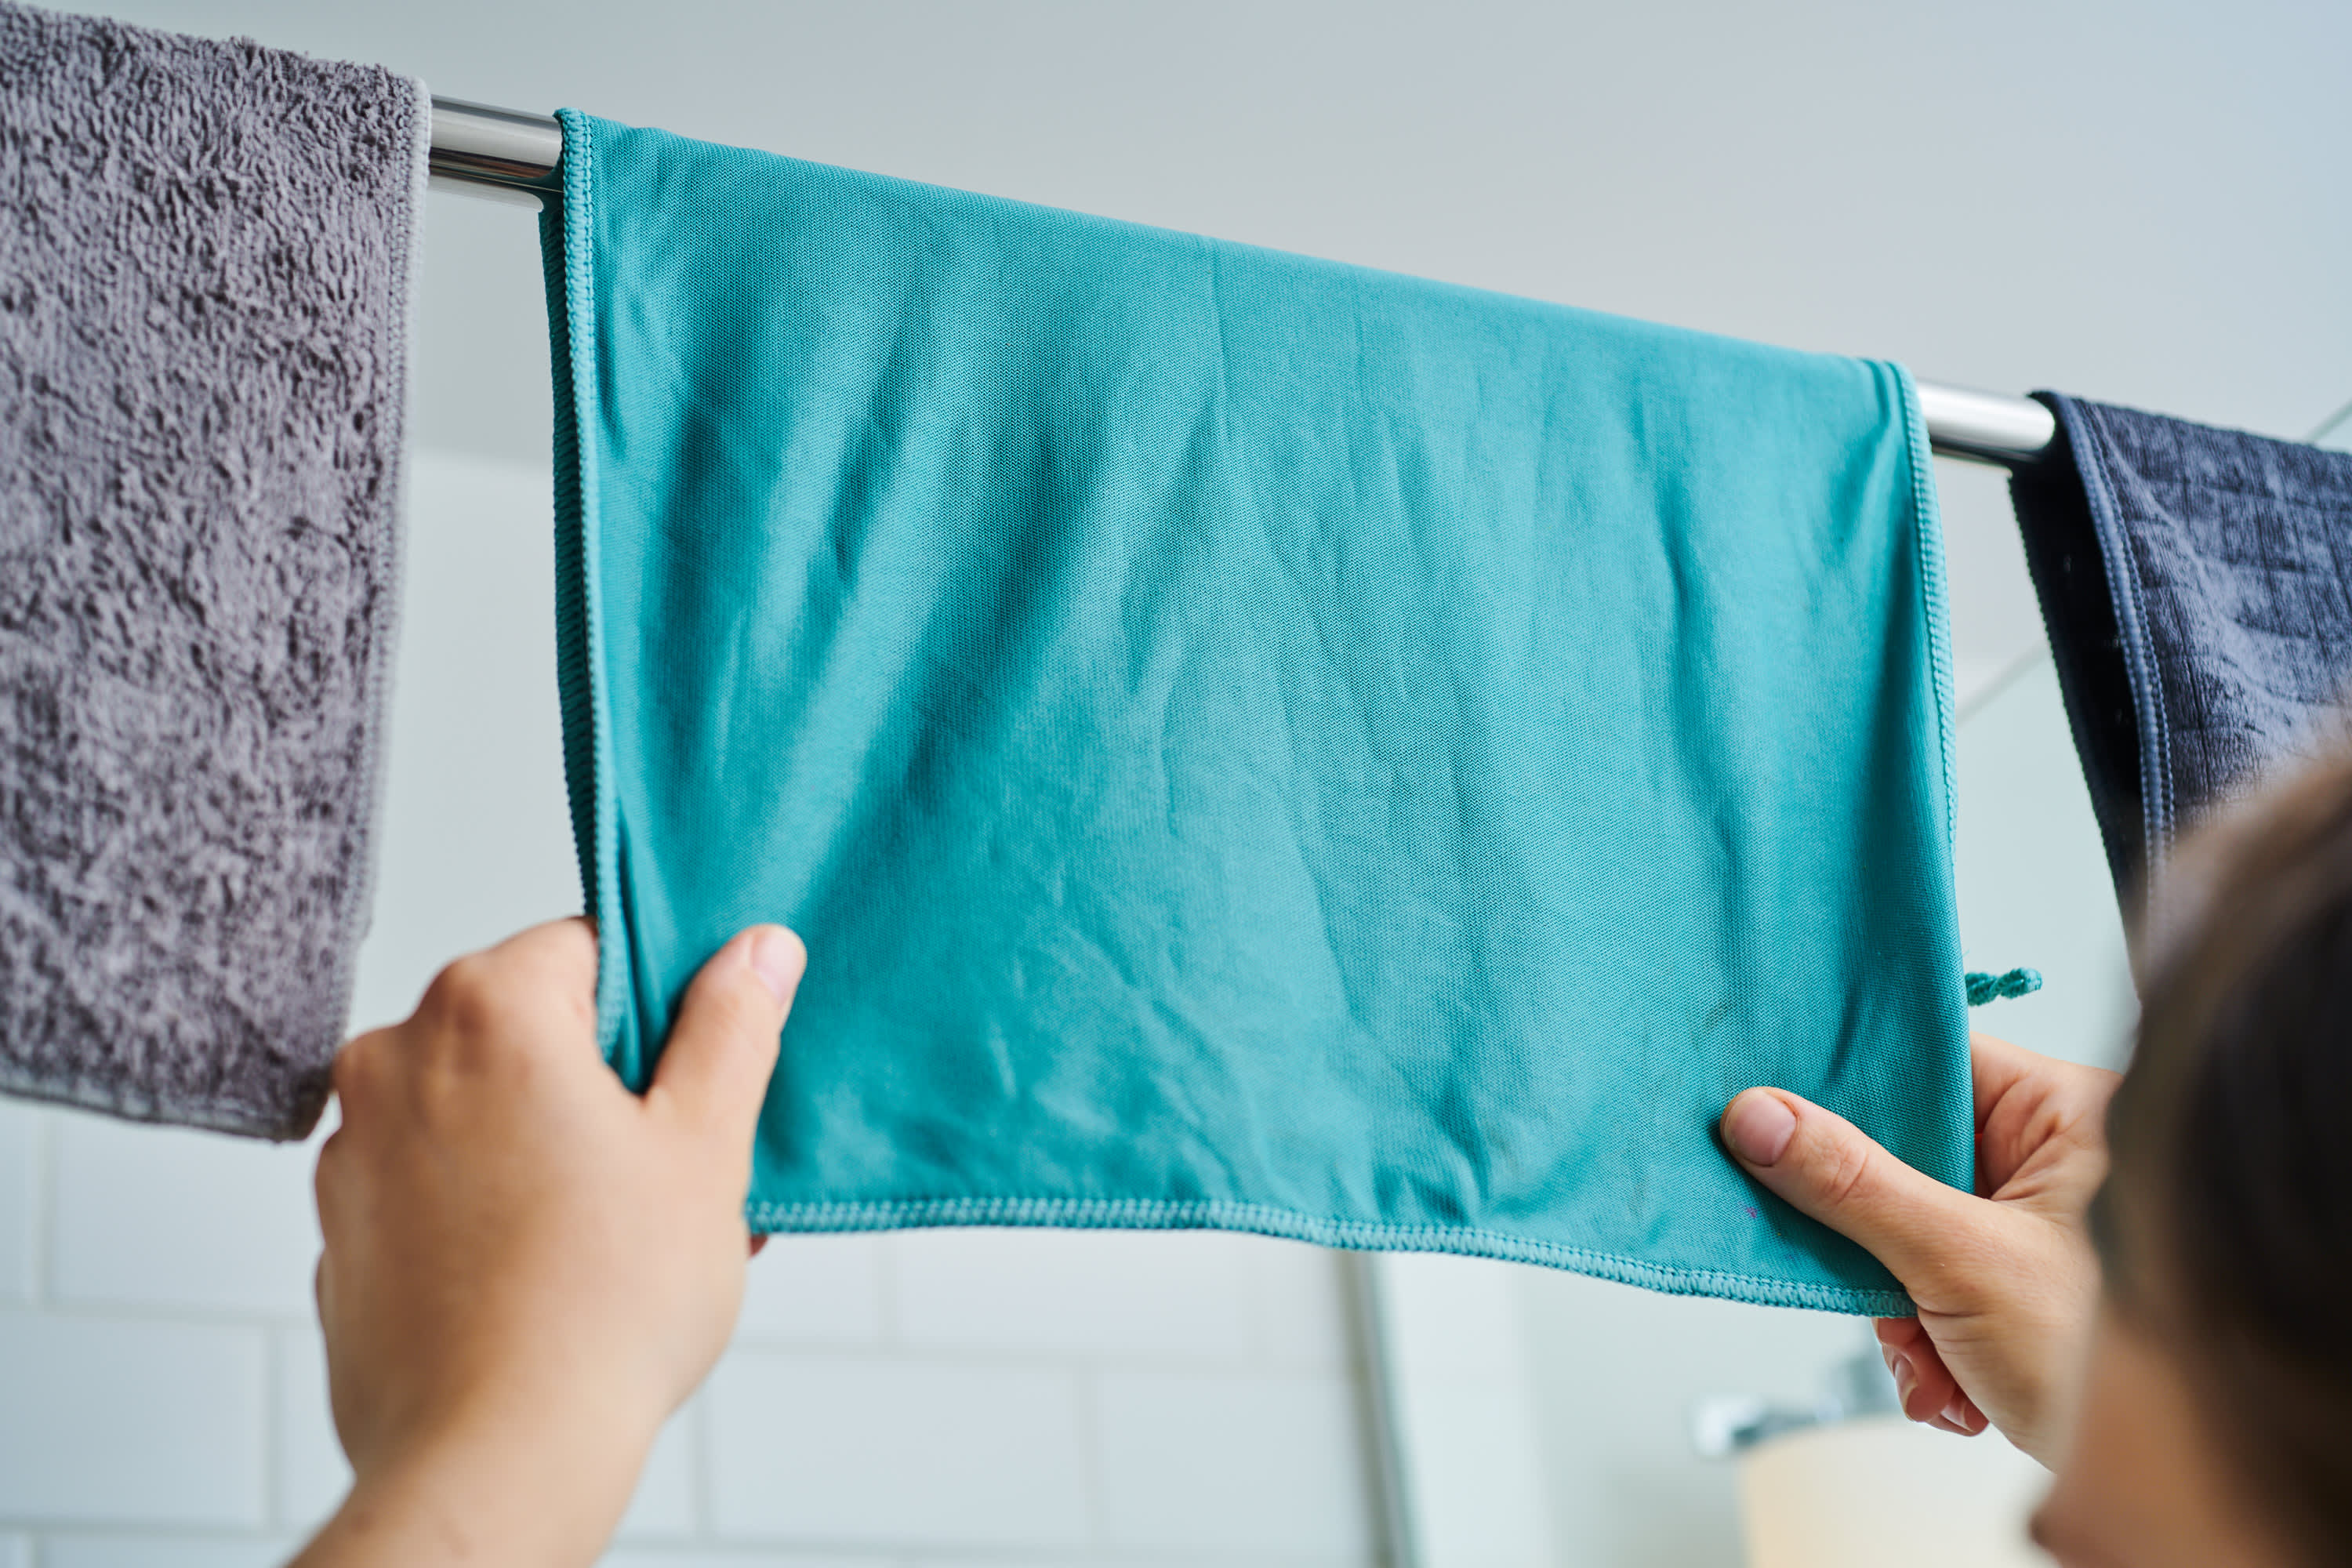 https://cdn.apartmenttherapy.info/image/upload/v1588365556/k/Photo/Lifestyle/2020-05-How-to-Clean-Microfiber-Cleaning-Cloths/How-to-Clean-Microfiber-Cleaning-Cloths002.jpg